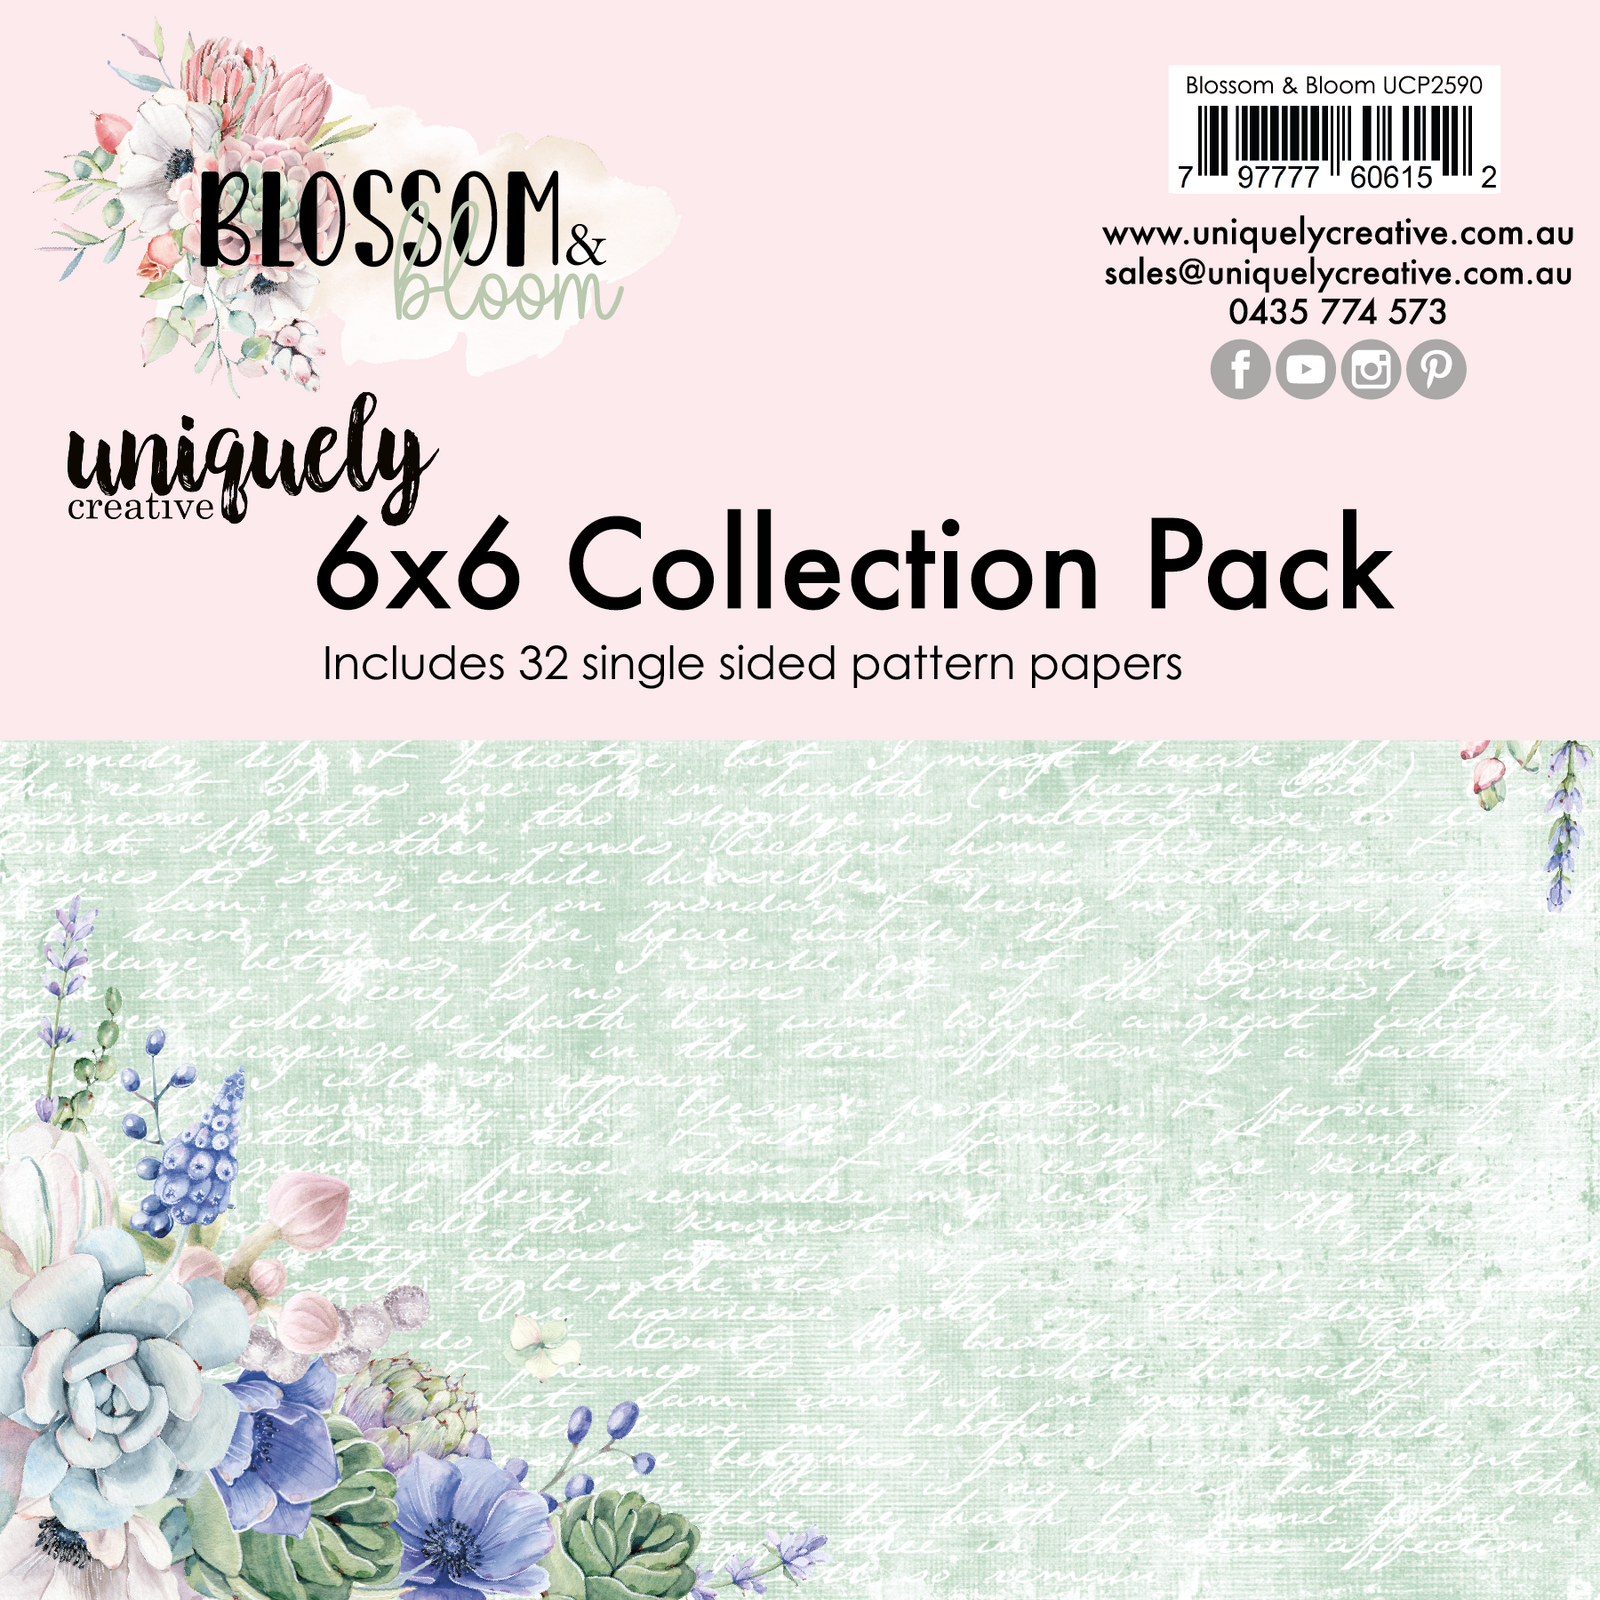 Uniquely Creative 6x6 Cardstock 210gsm Blossom and Bloom